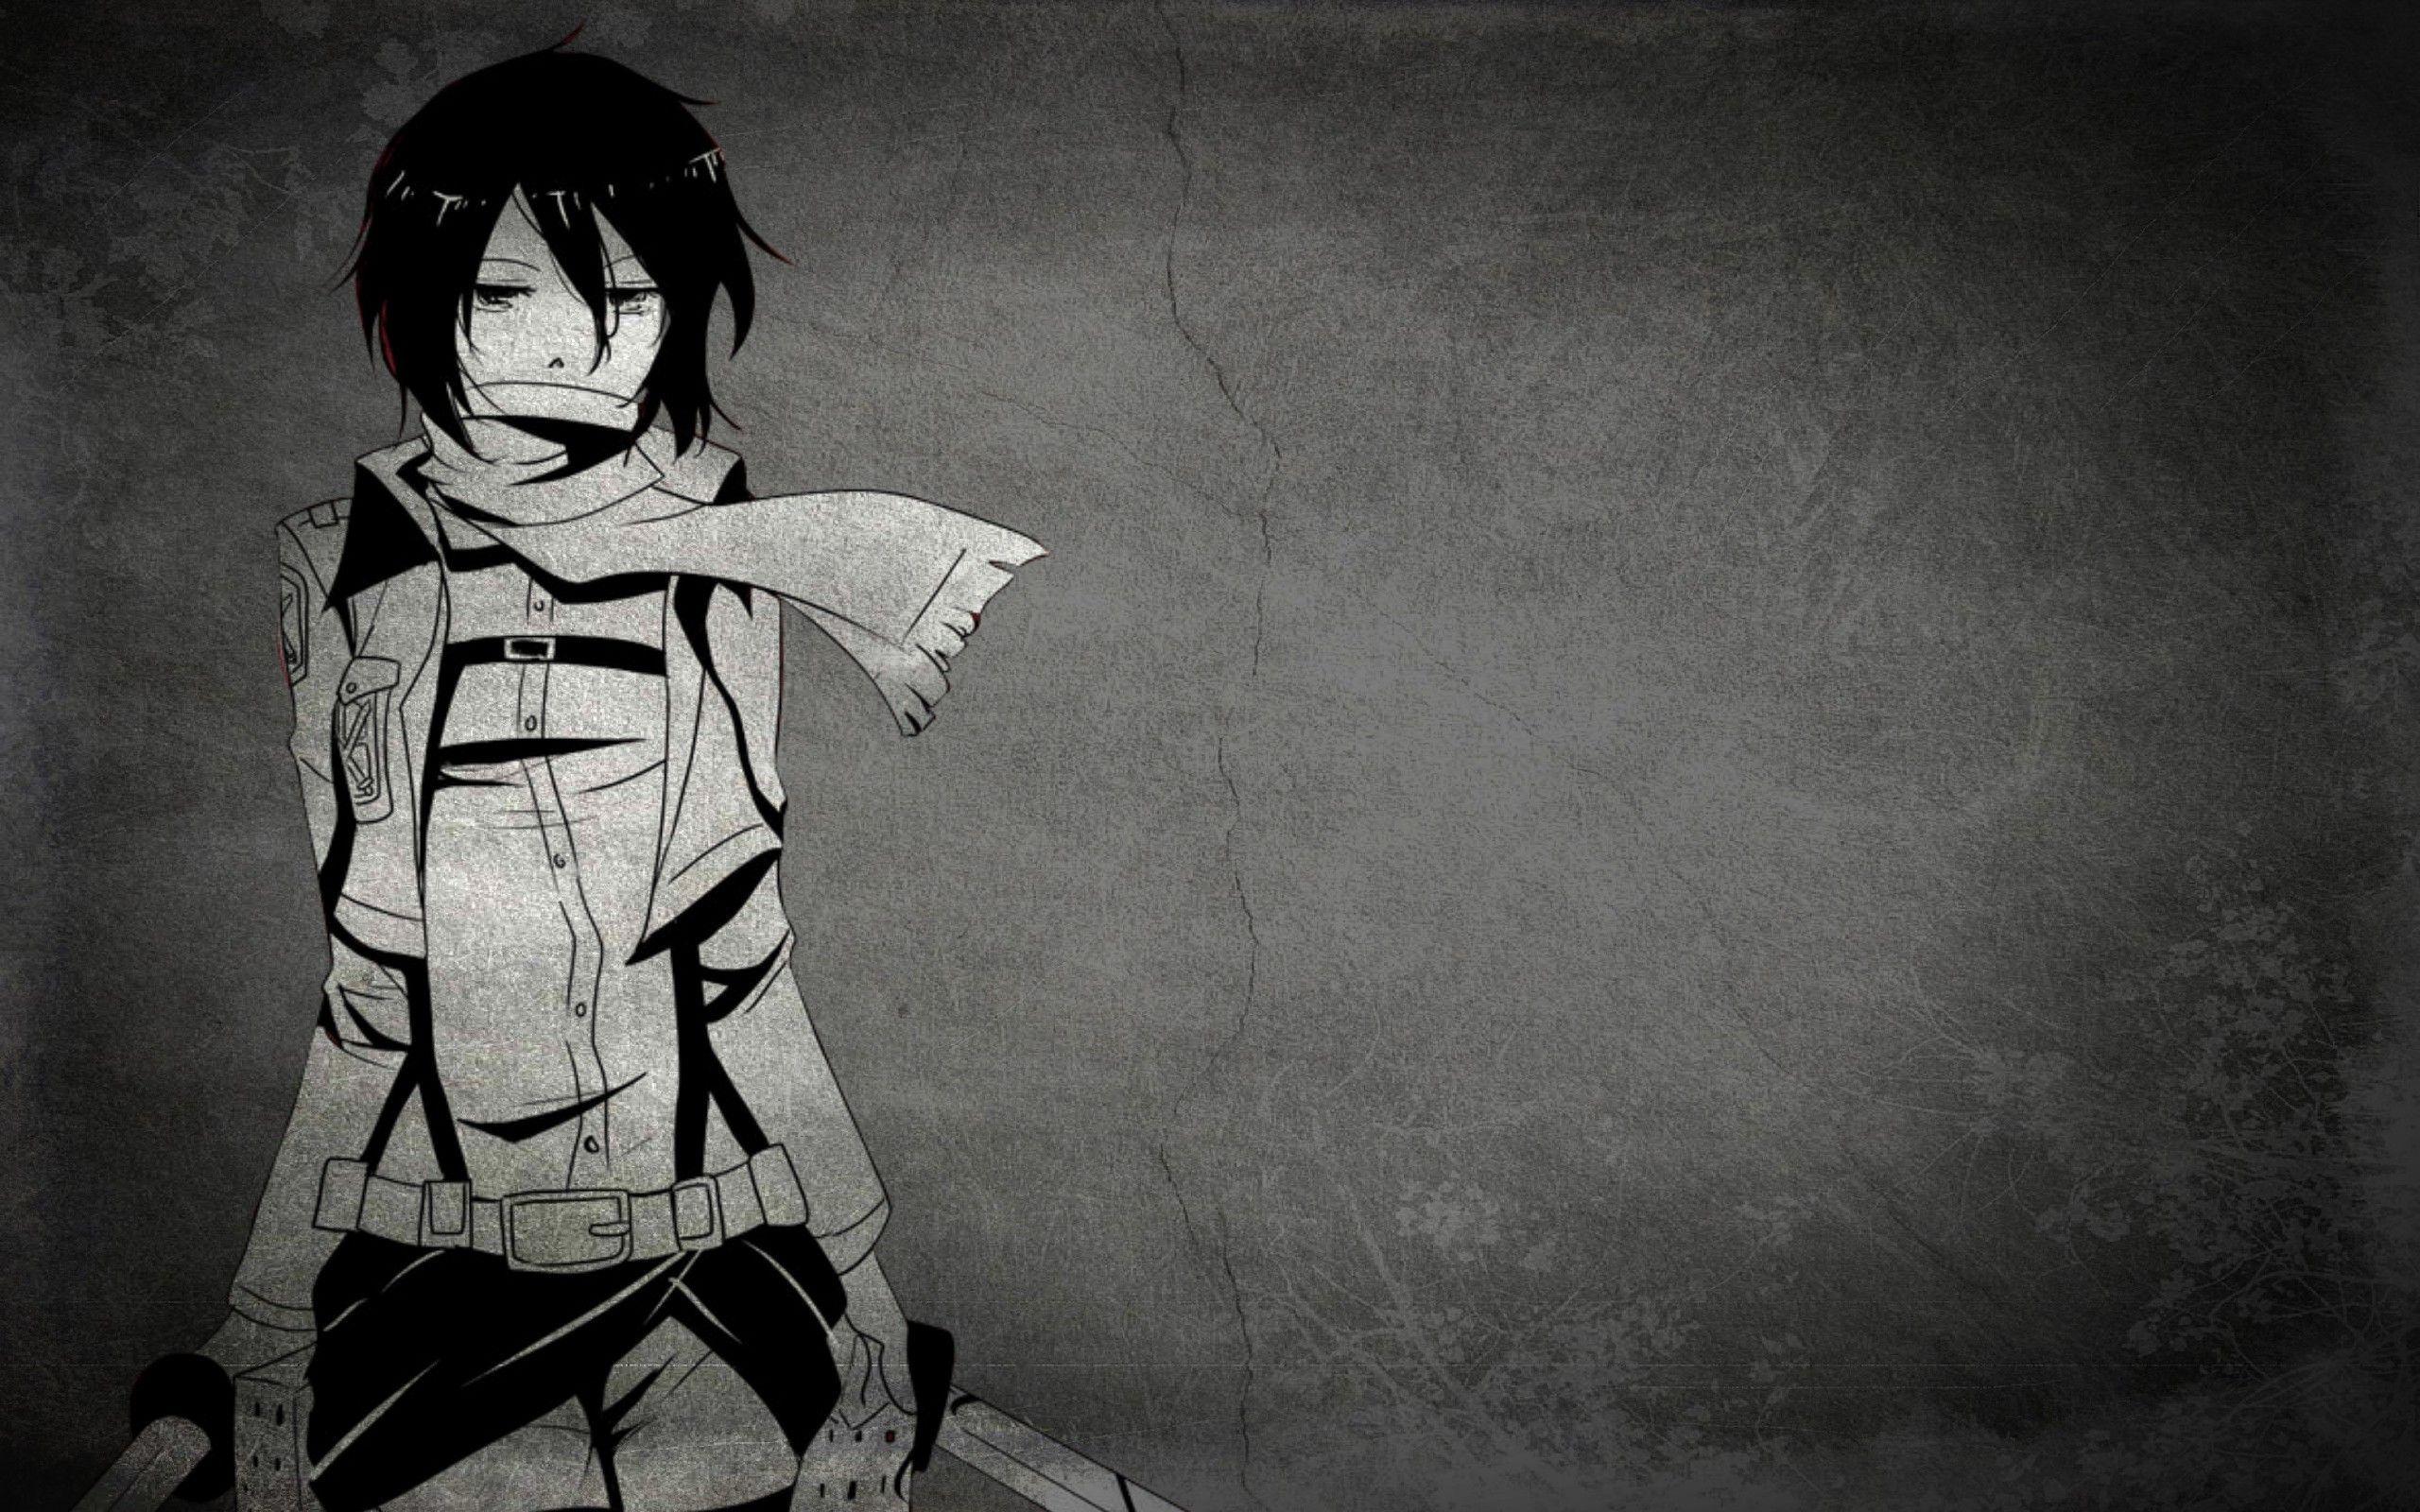 Grayscale Anime Wallpaper Free Grayscale Anime Background